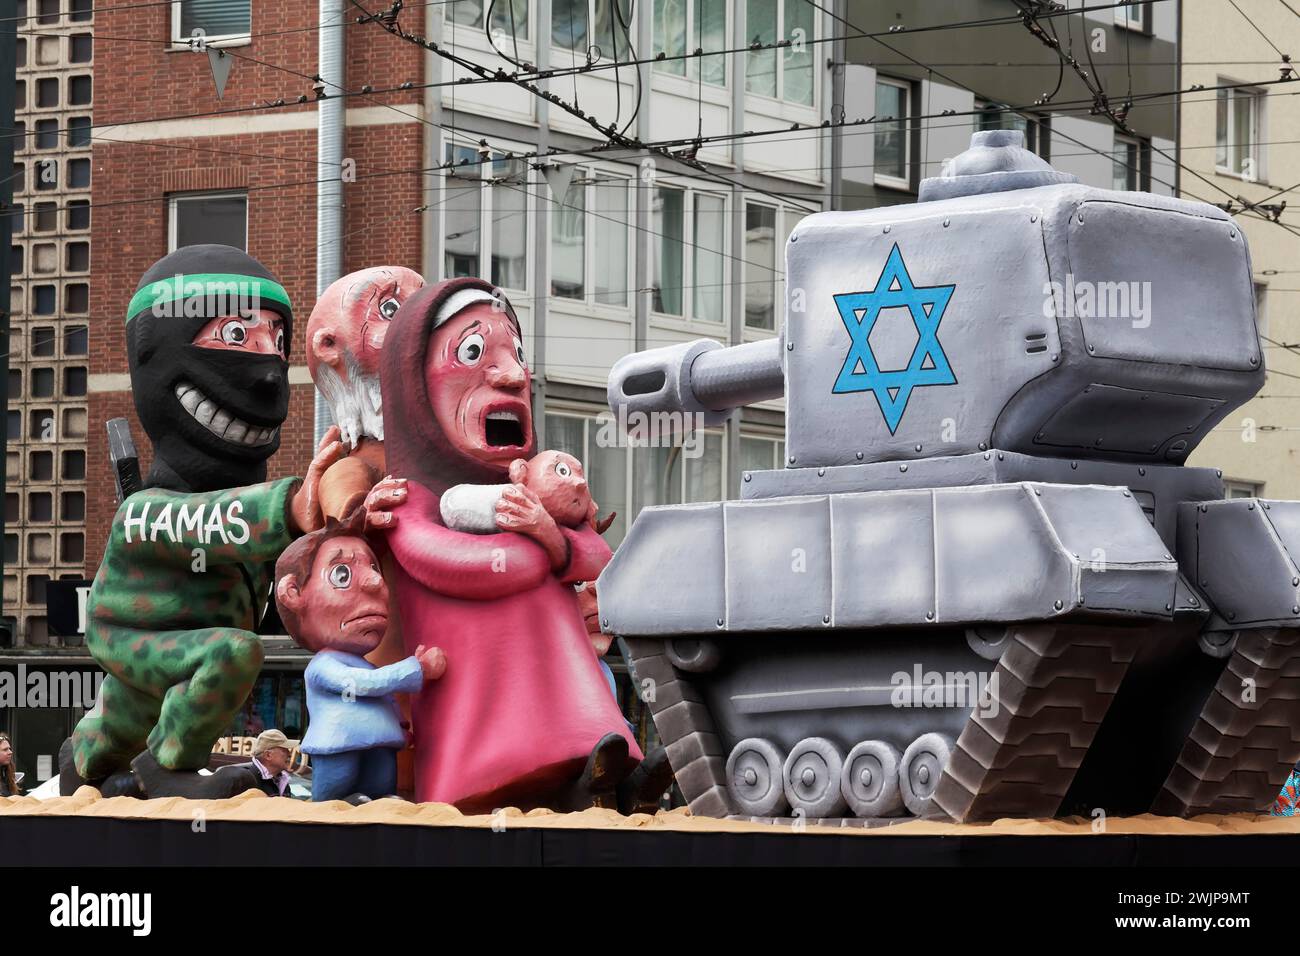 Hamas terrorist hides behind civilians in front of an Israeli tank, papier-mache figures, satirical float by Jacques Tilly, Rose Monday parade Stock Photo